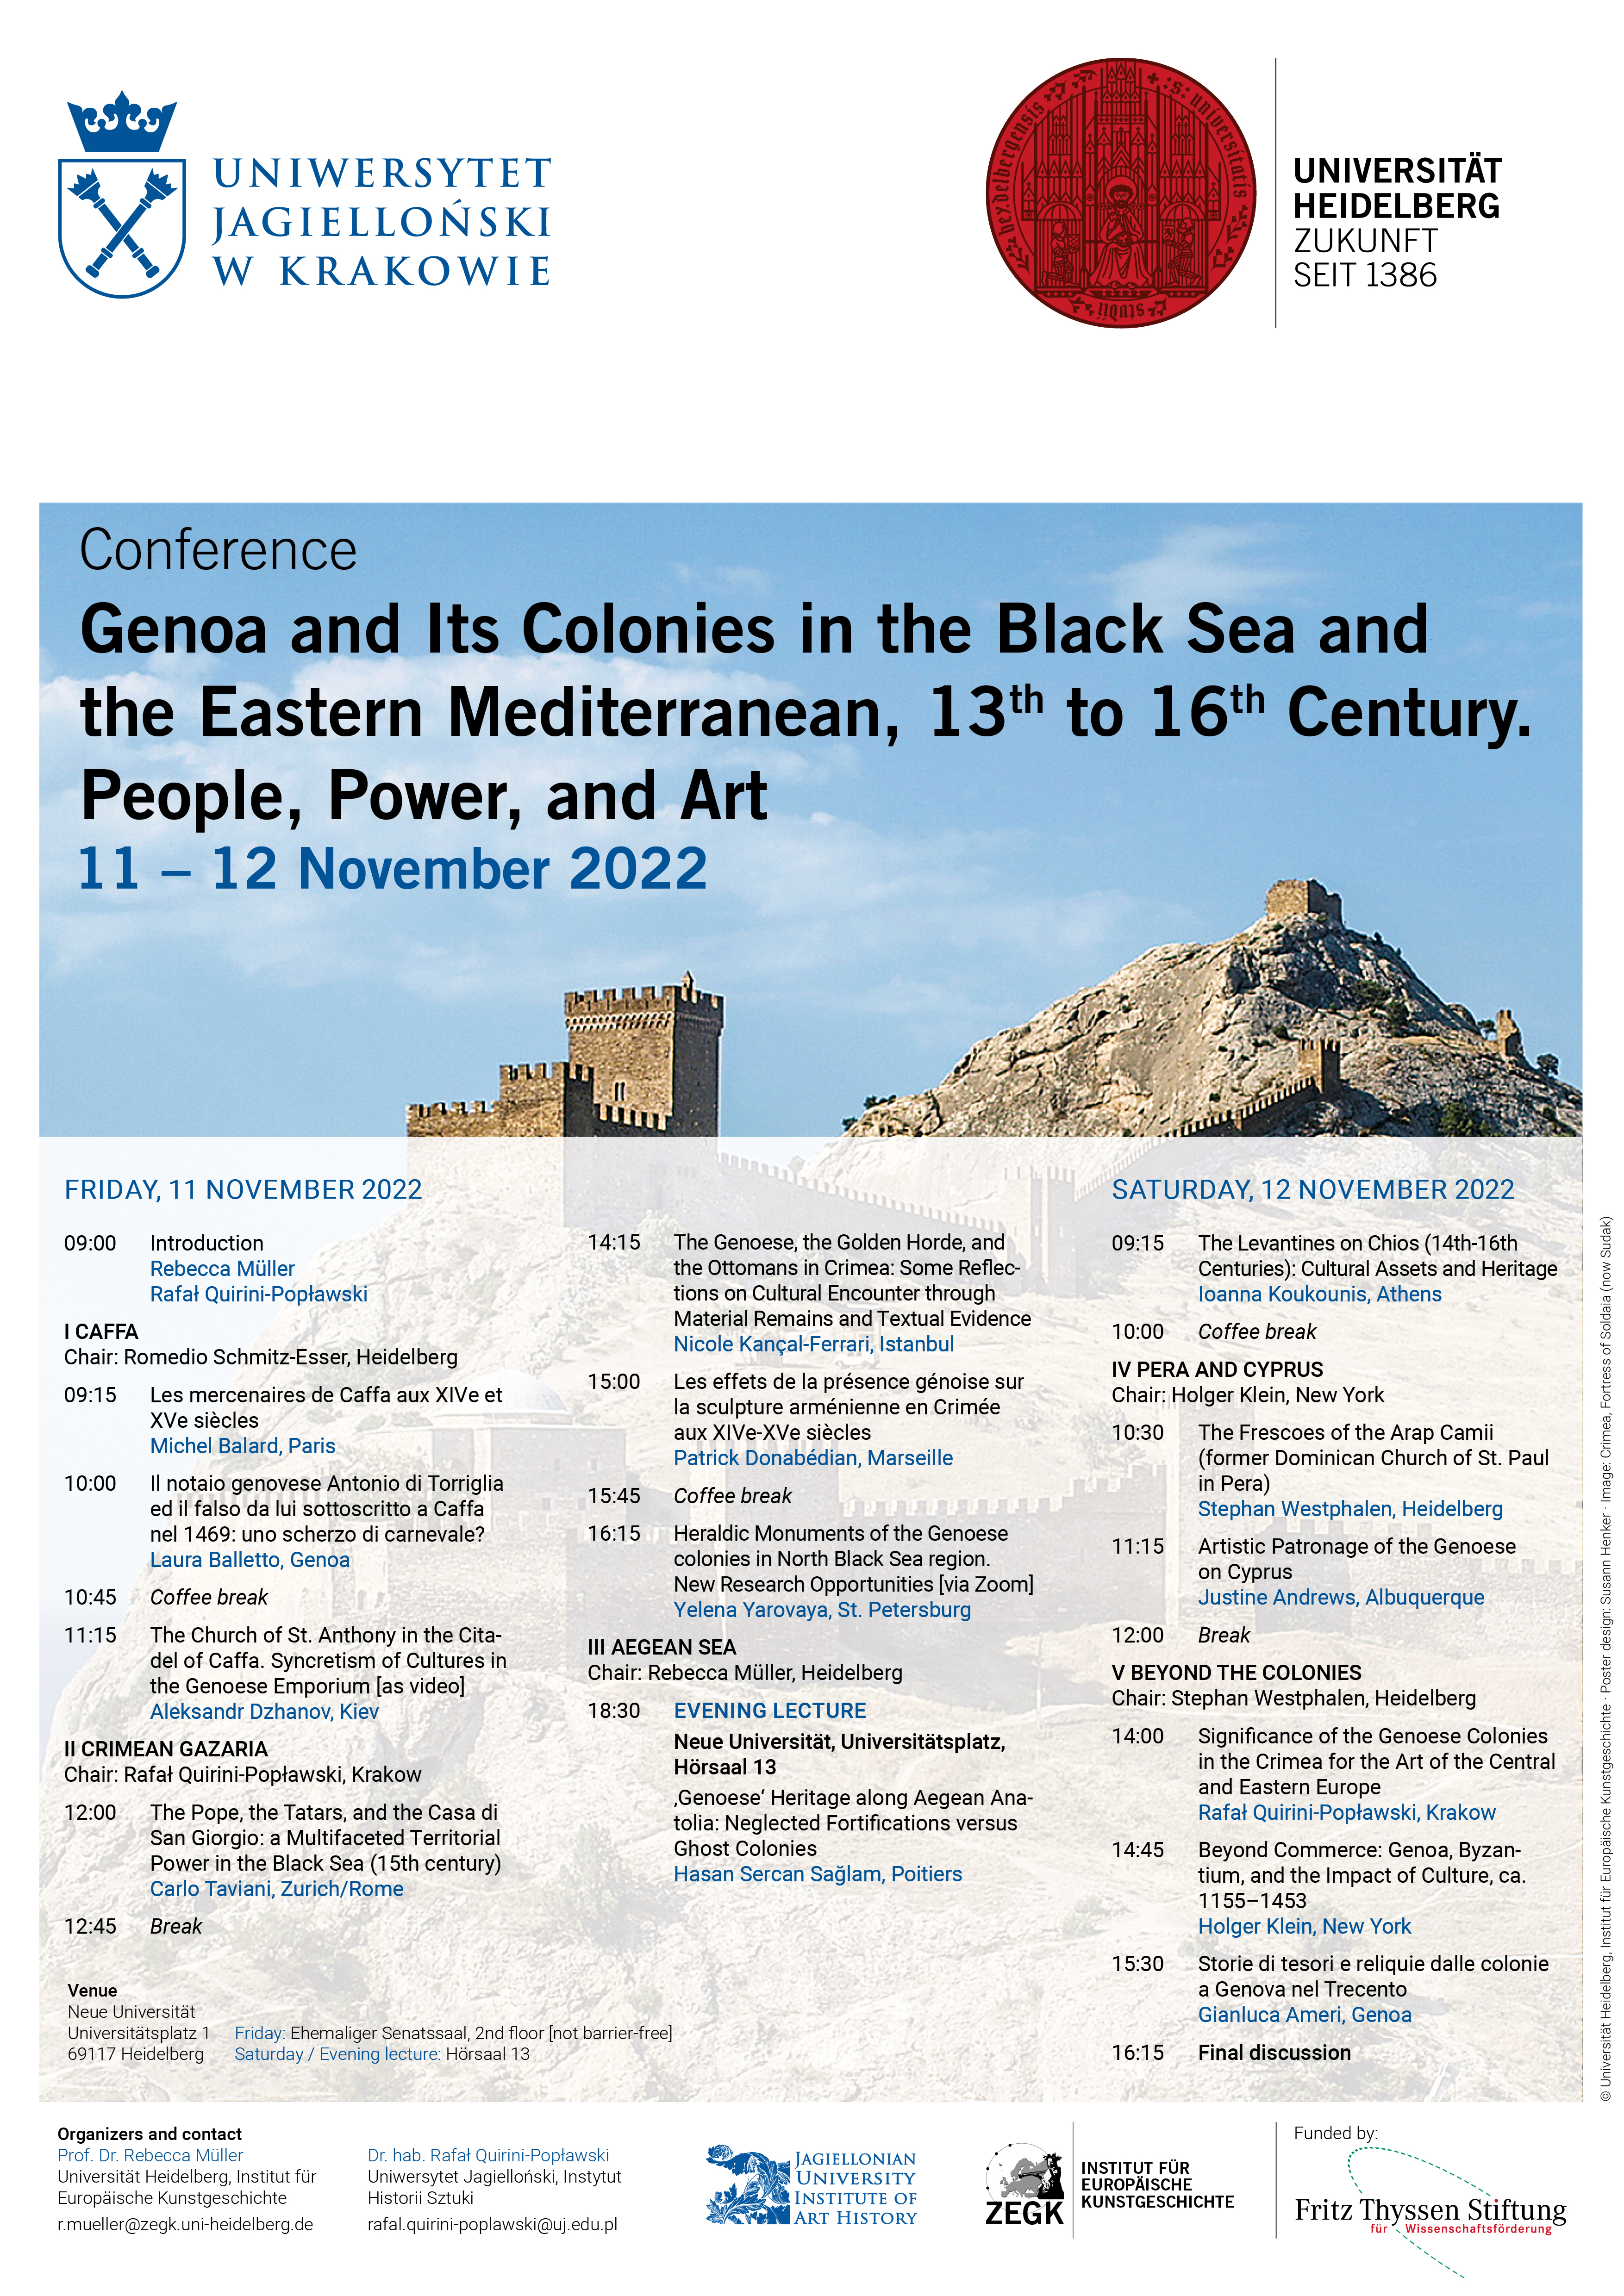 11.–12.11.2022 | Genoa and Its Colonies in the Black Sea and the Eastern Mediterranean, 13th to 16th Century. People, Power, and Art